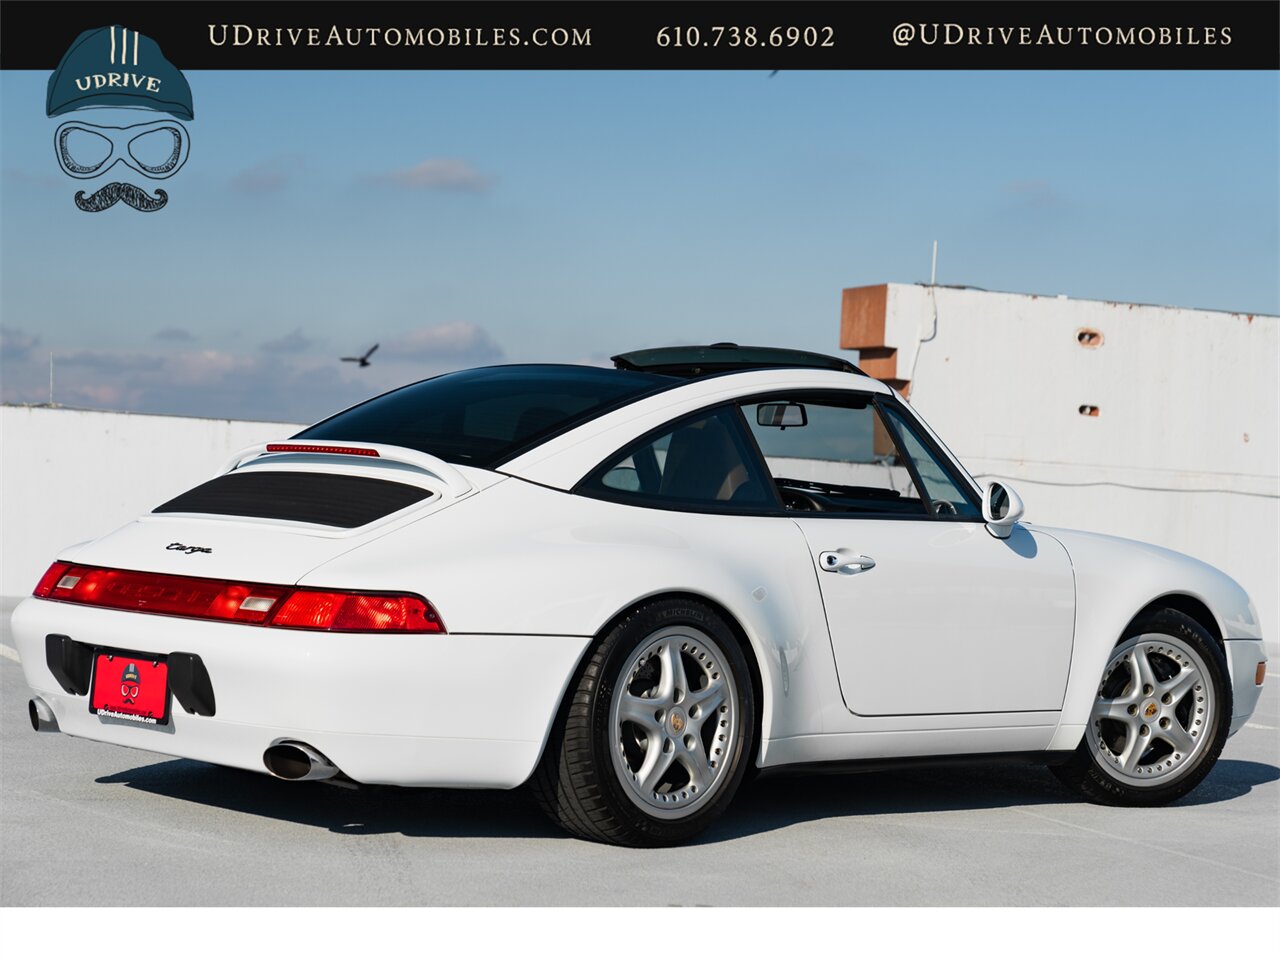 1998 Porsche 911 Carrera 993 Targa  1 of 122 Produced 6 Speed $10k Recent Service Engine Reseal - Photo 2 - West Chester, PA 19382